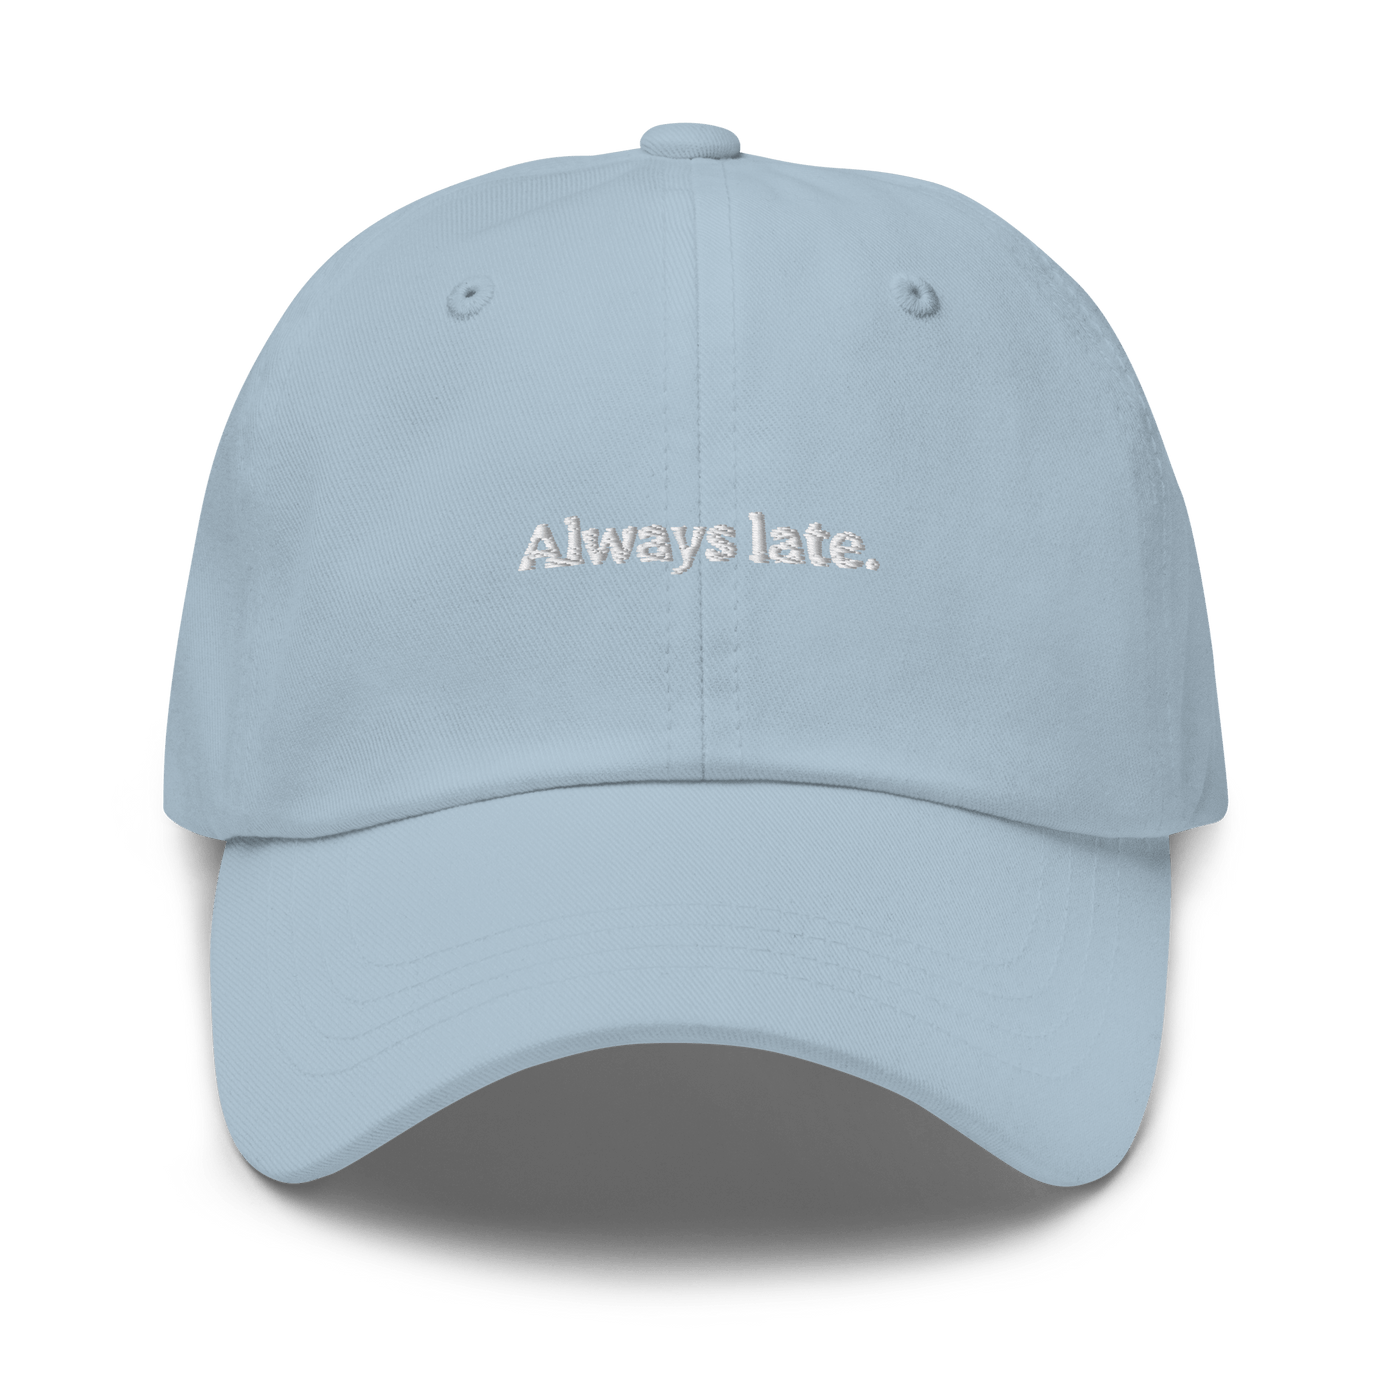 Always Late. Dad hat - Light Blue - - Just Another Cap Store